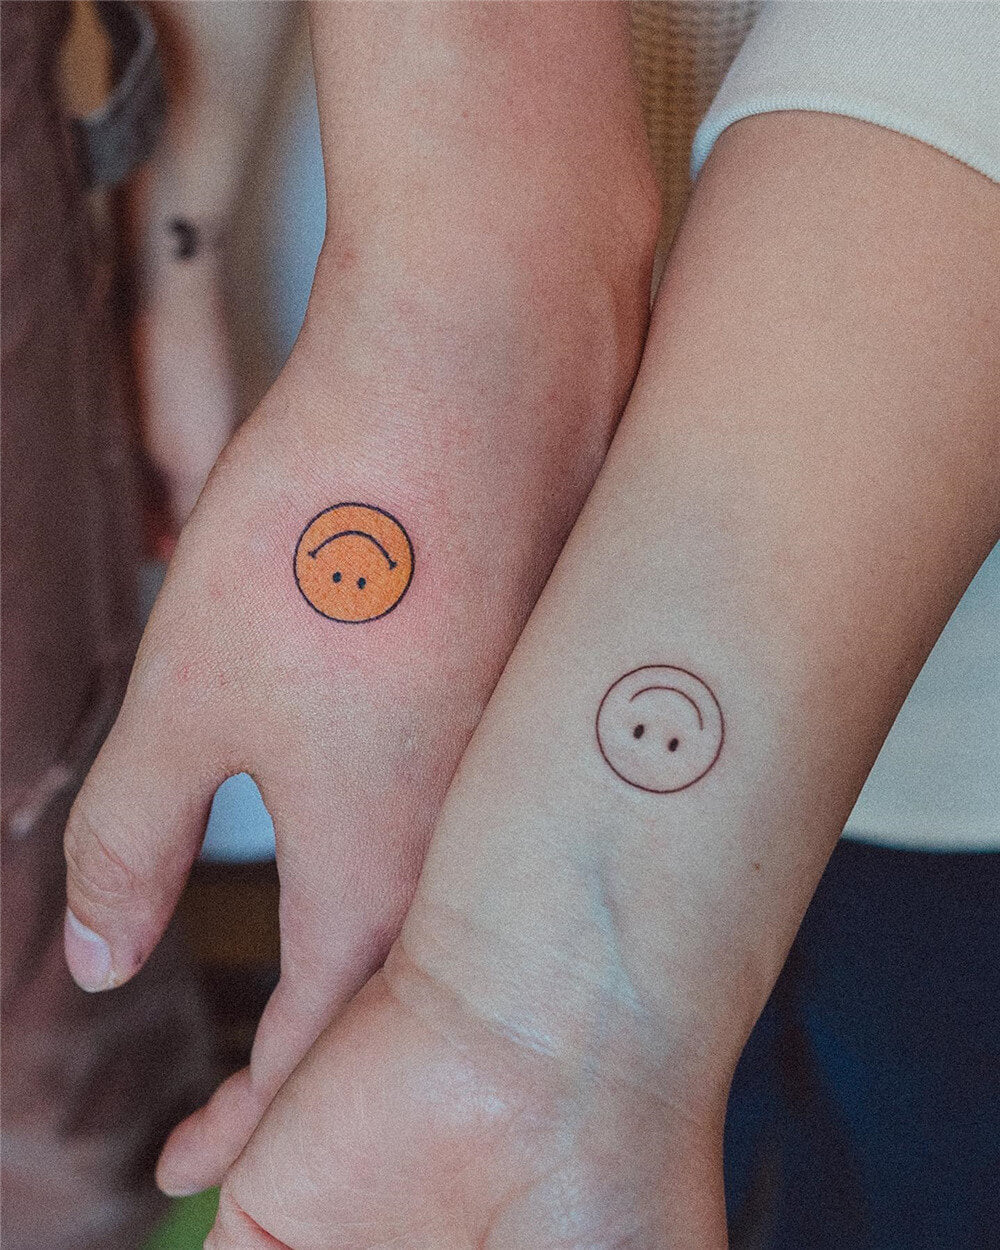 Mauvola  Smiley Face Print Waterproof Temporary Tattoo  YesStyle